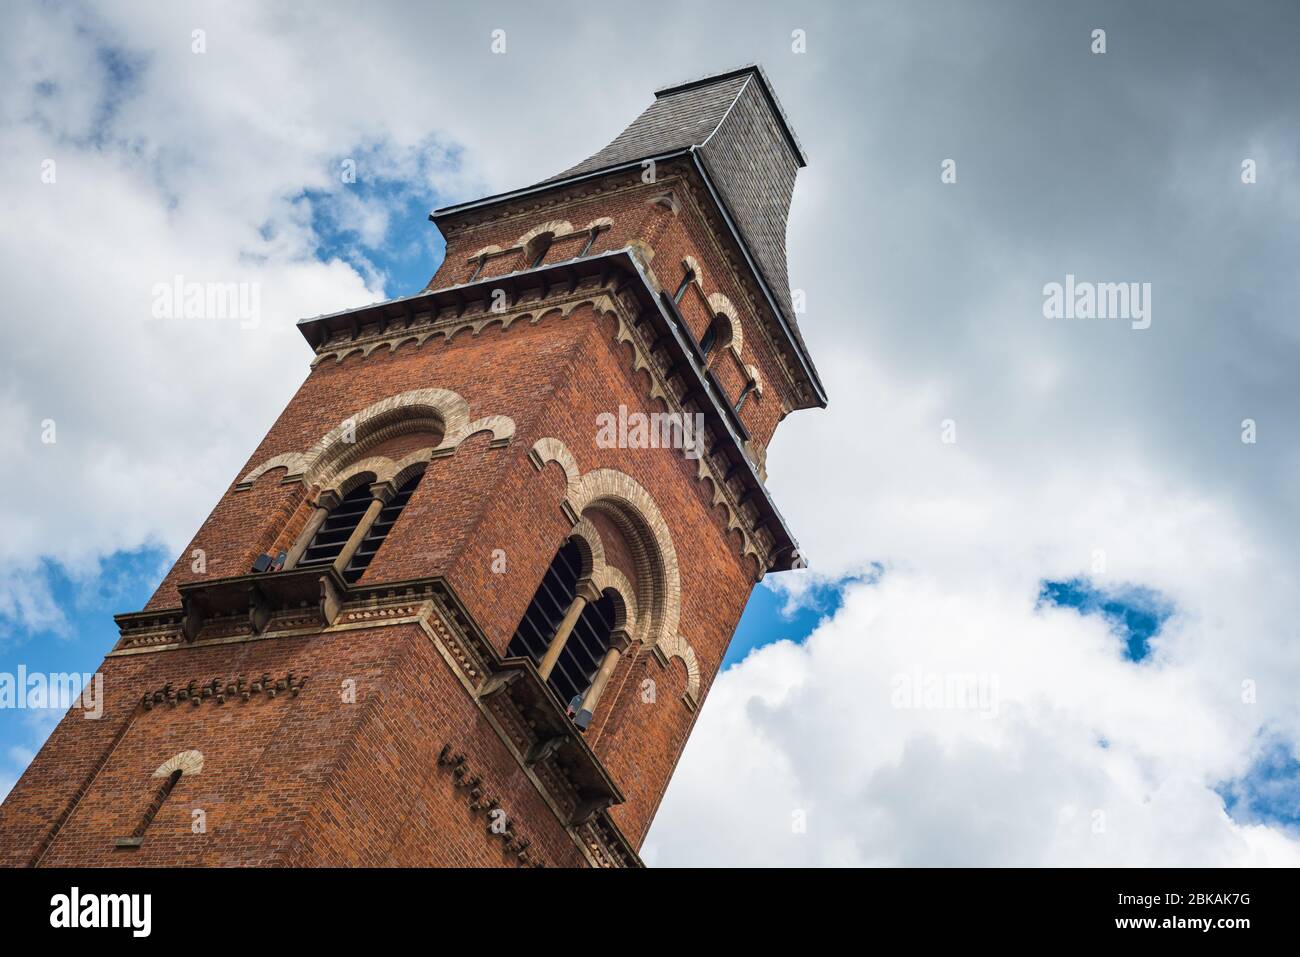 The tower of St Peter's Church, Ancoats. Now home of the Halle Orchestra. Stock Photo